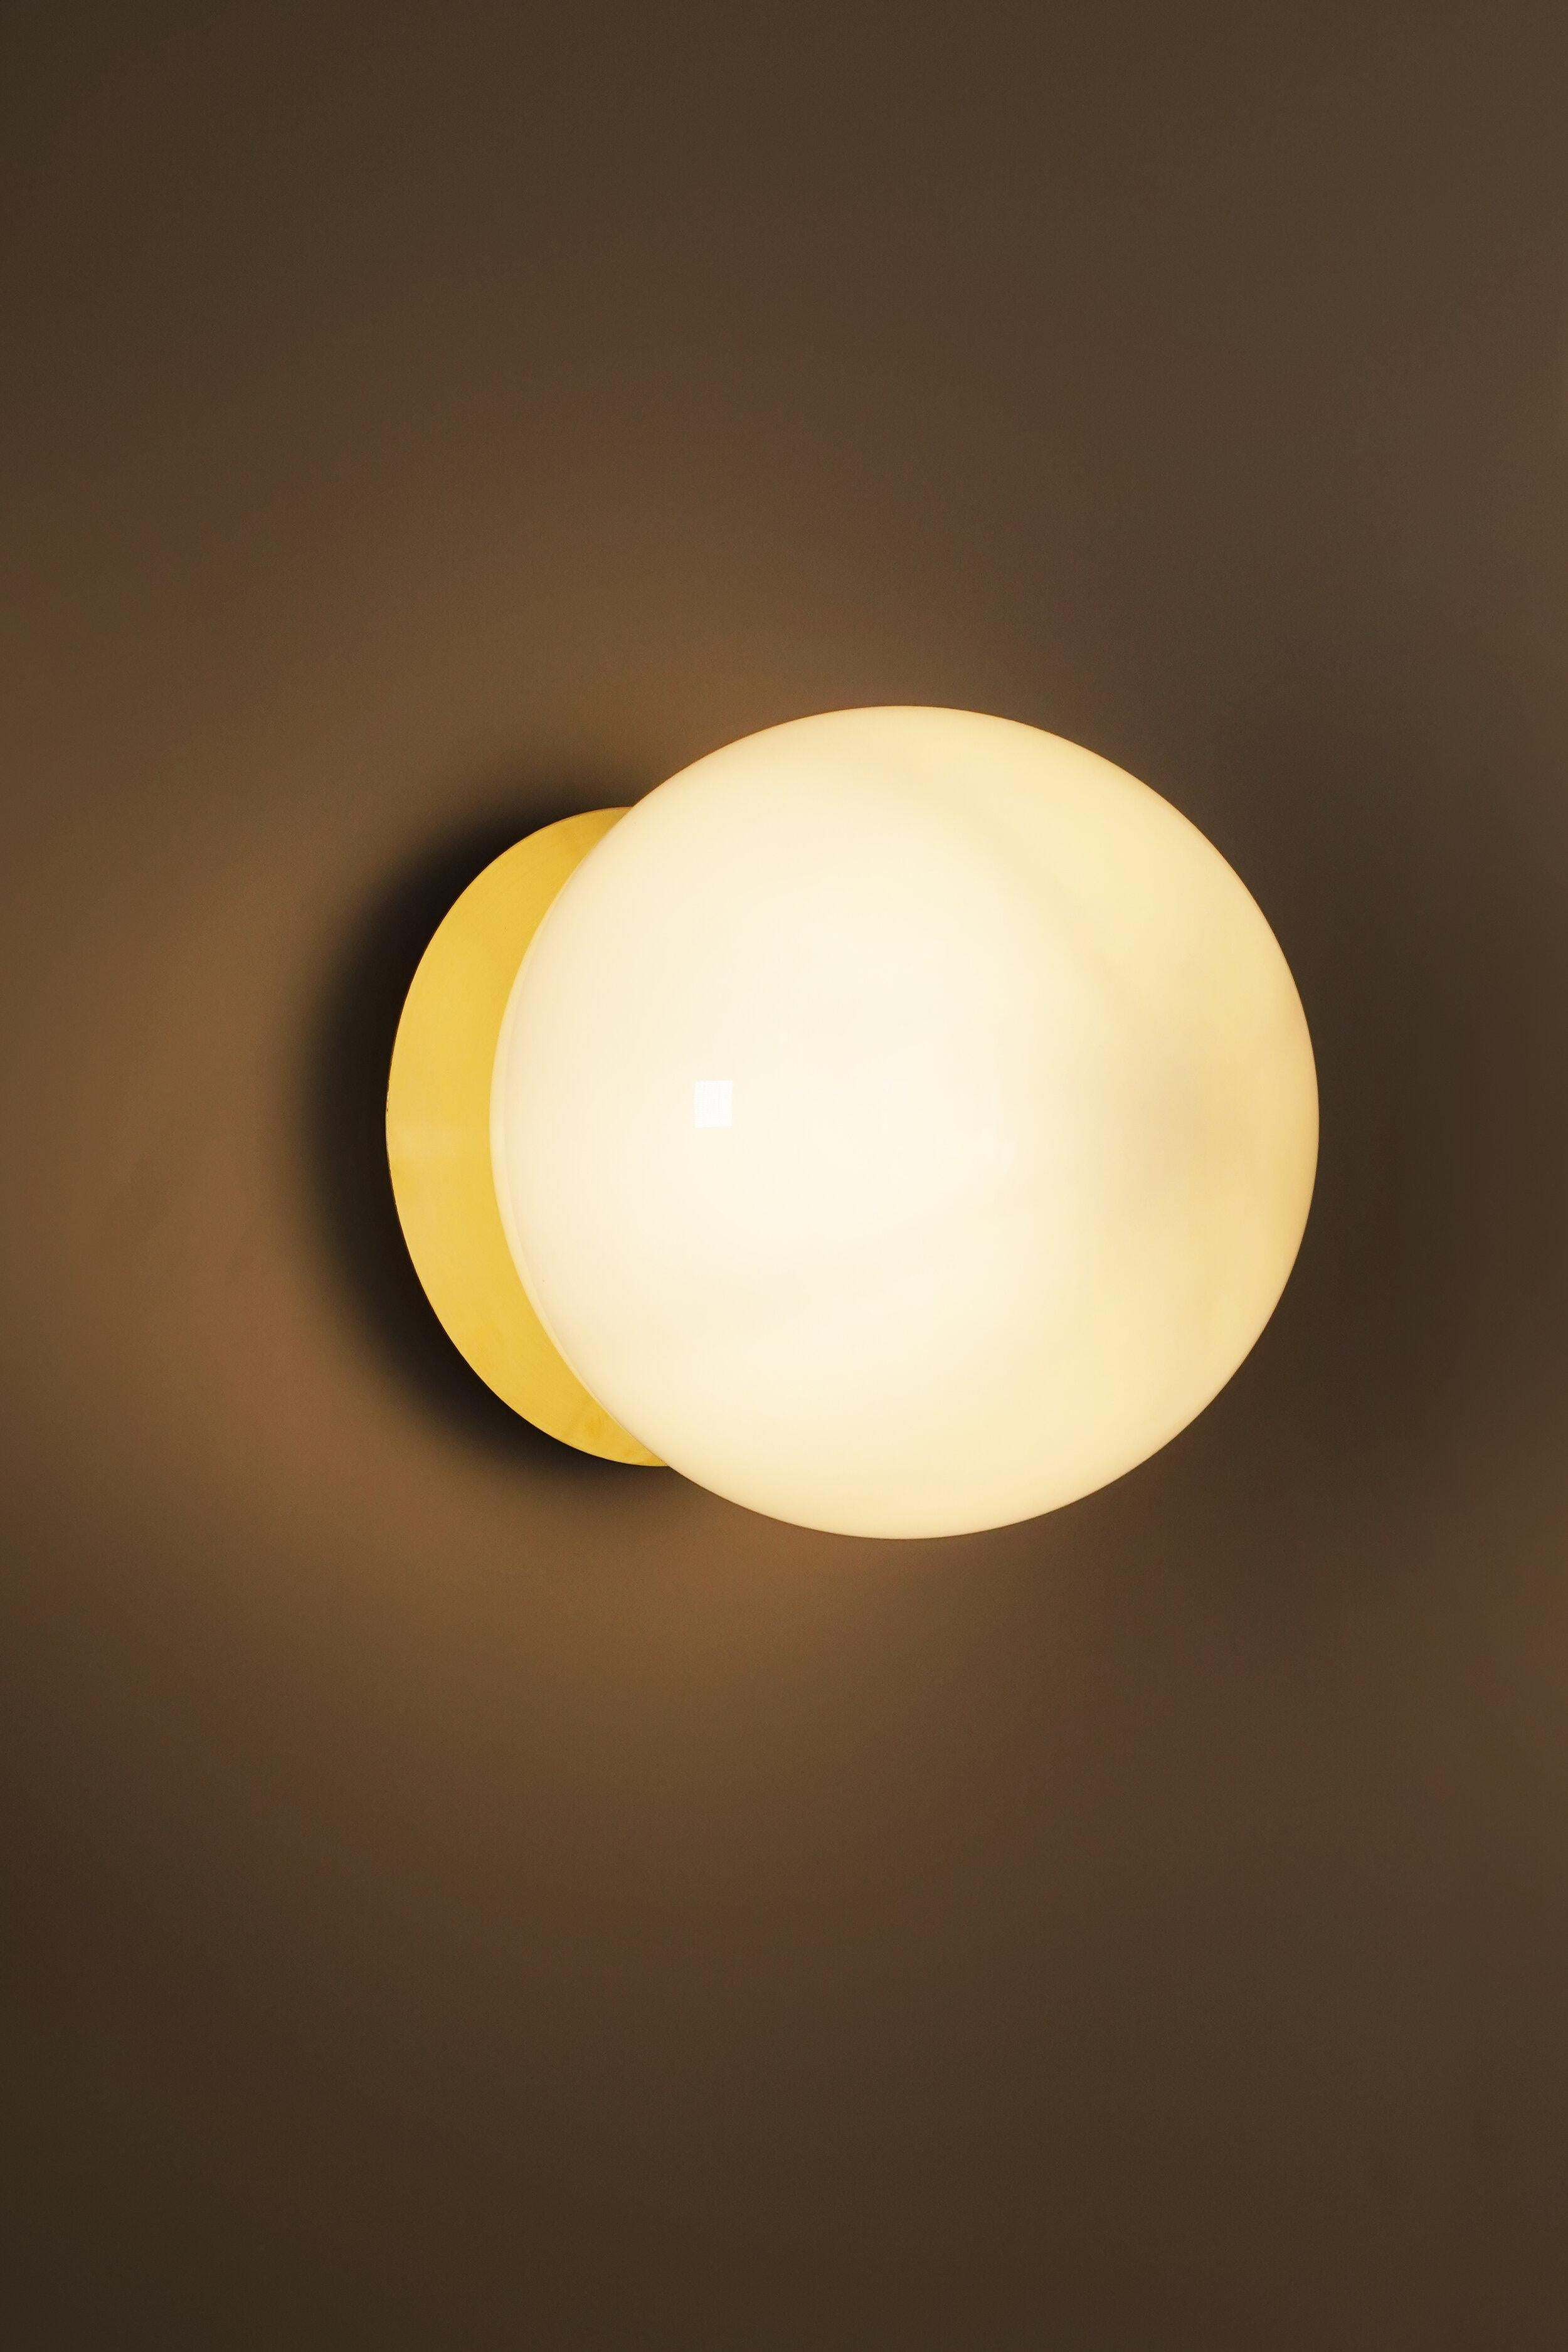 Disco wall light by Contain
Dimensions: D 20 x H 21.5 cm 
Materials: Brass structure and opal glass.
Available in different finishes. 

All our lamps can be wired according to each country. If sold to the USA it will be wired for the USA for